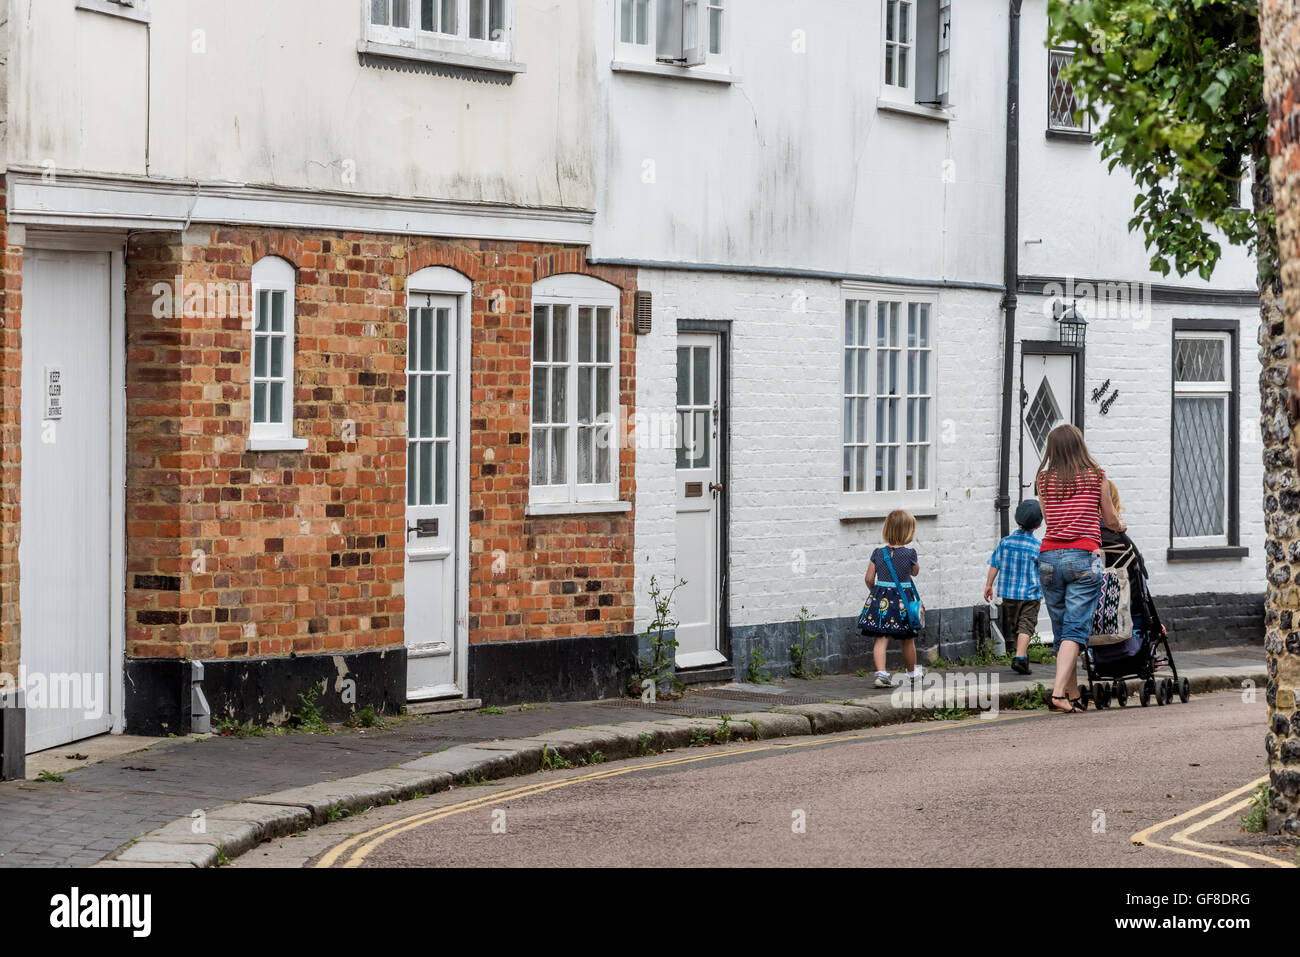 Street scenes in the historic town of Sandwich in Kent. Stock Photo